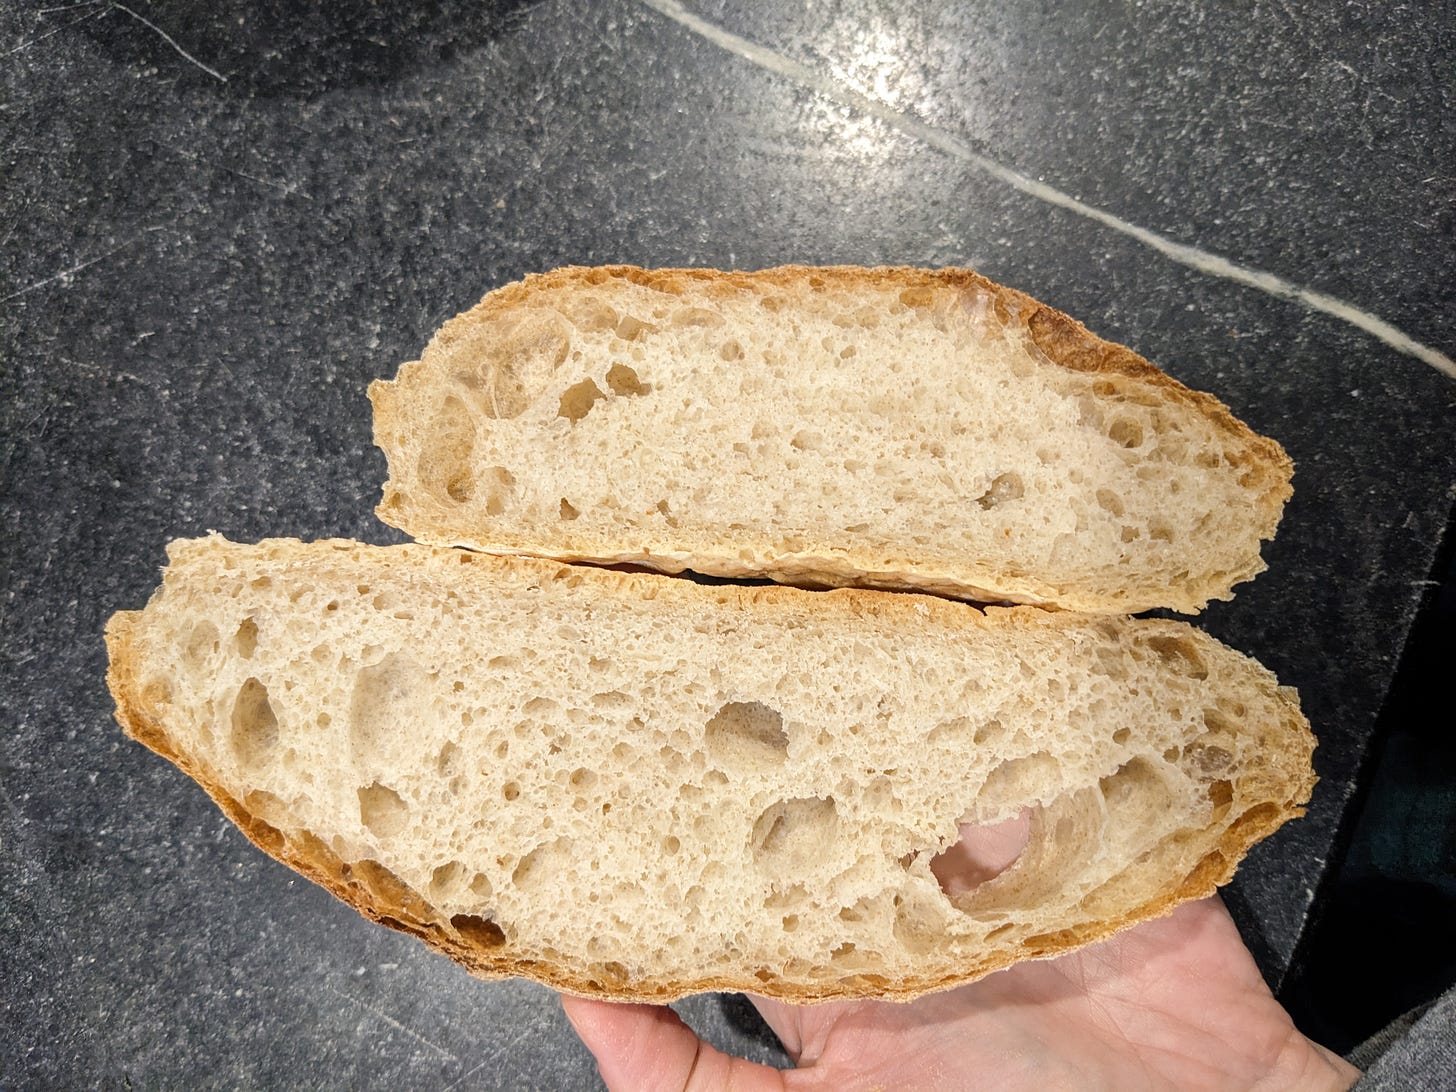 A pair of bread slices on their sides to show the texture.